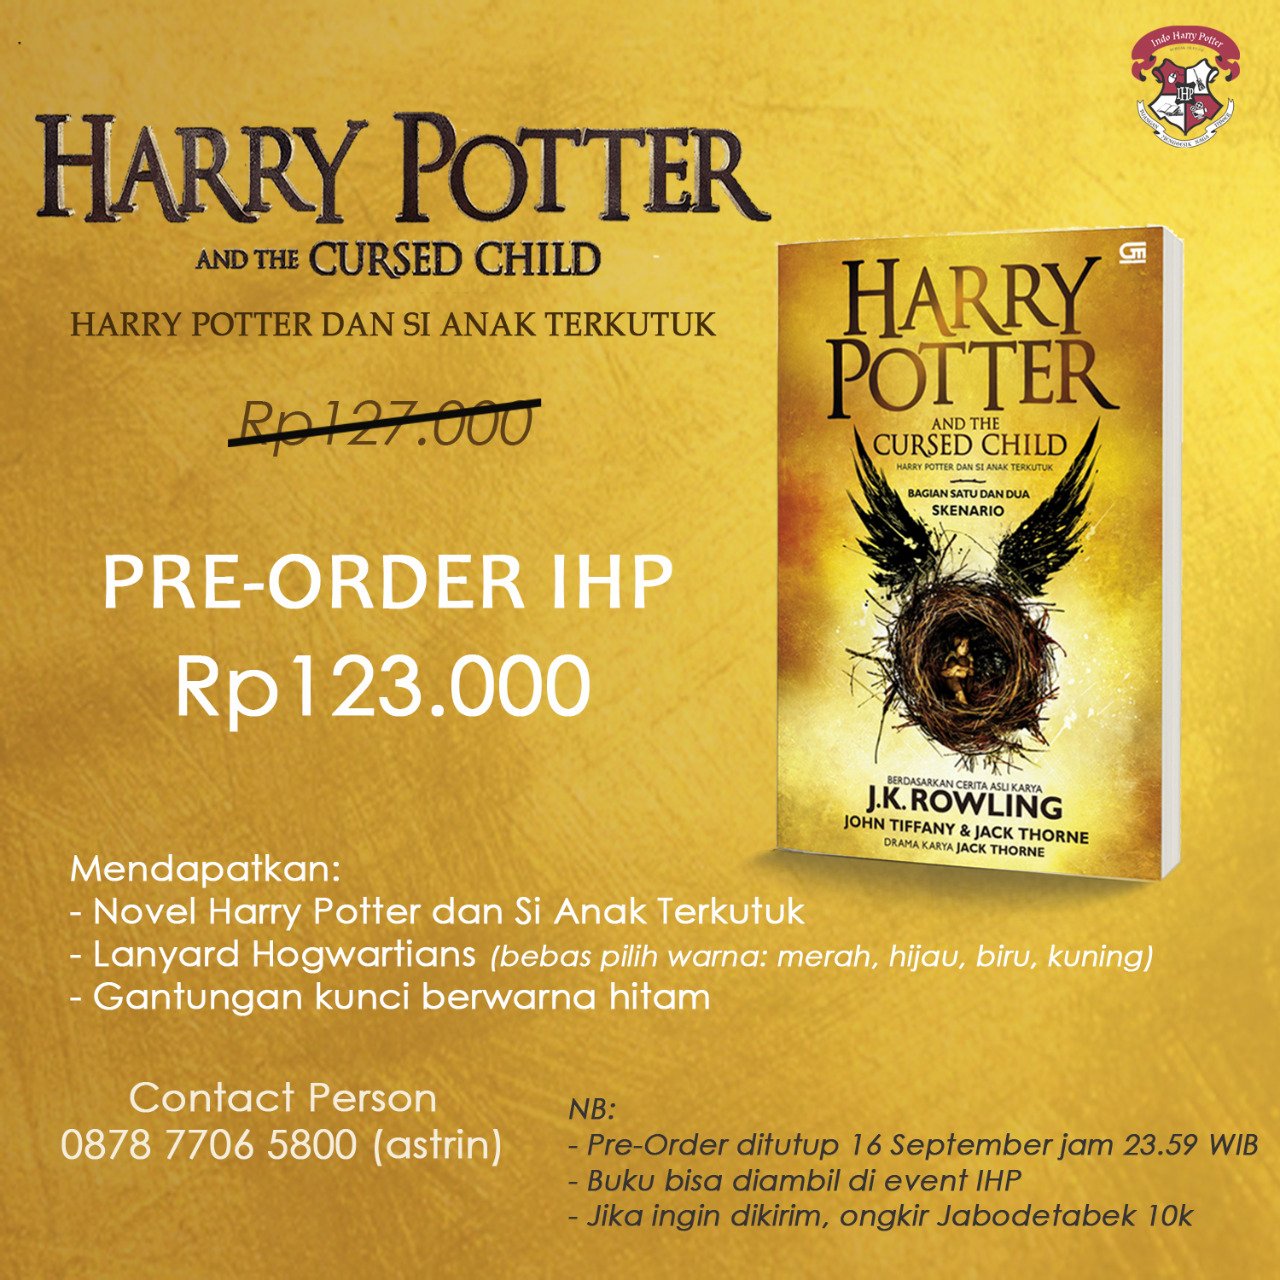 Detail Buku Harry Potter And The Cursed Child Versi Indonesia Nomer 12